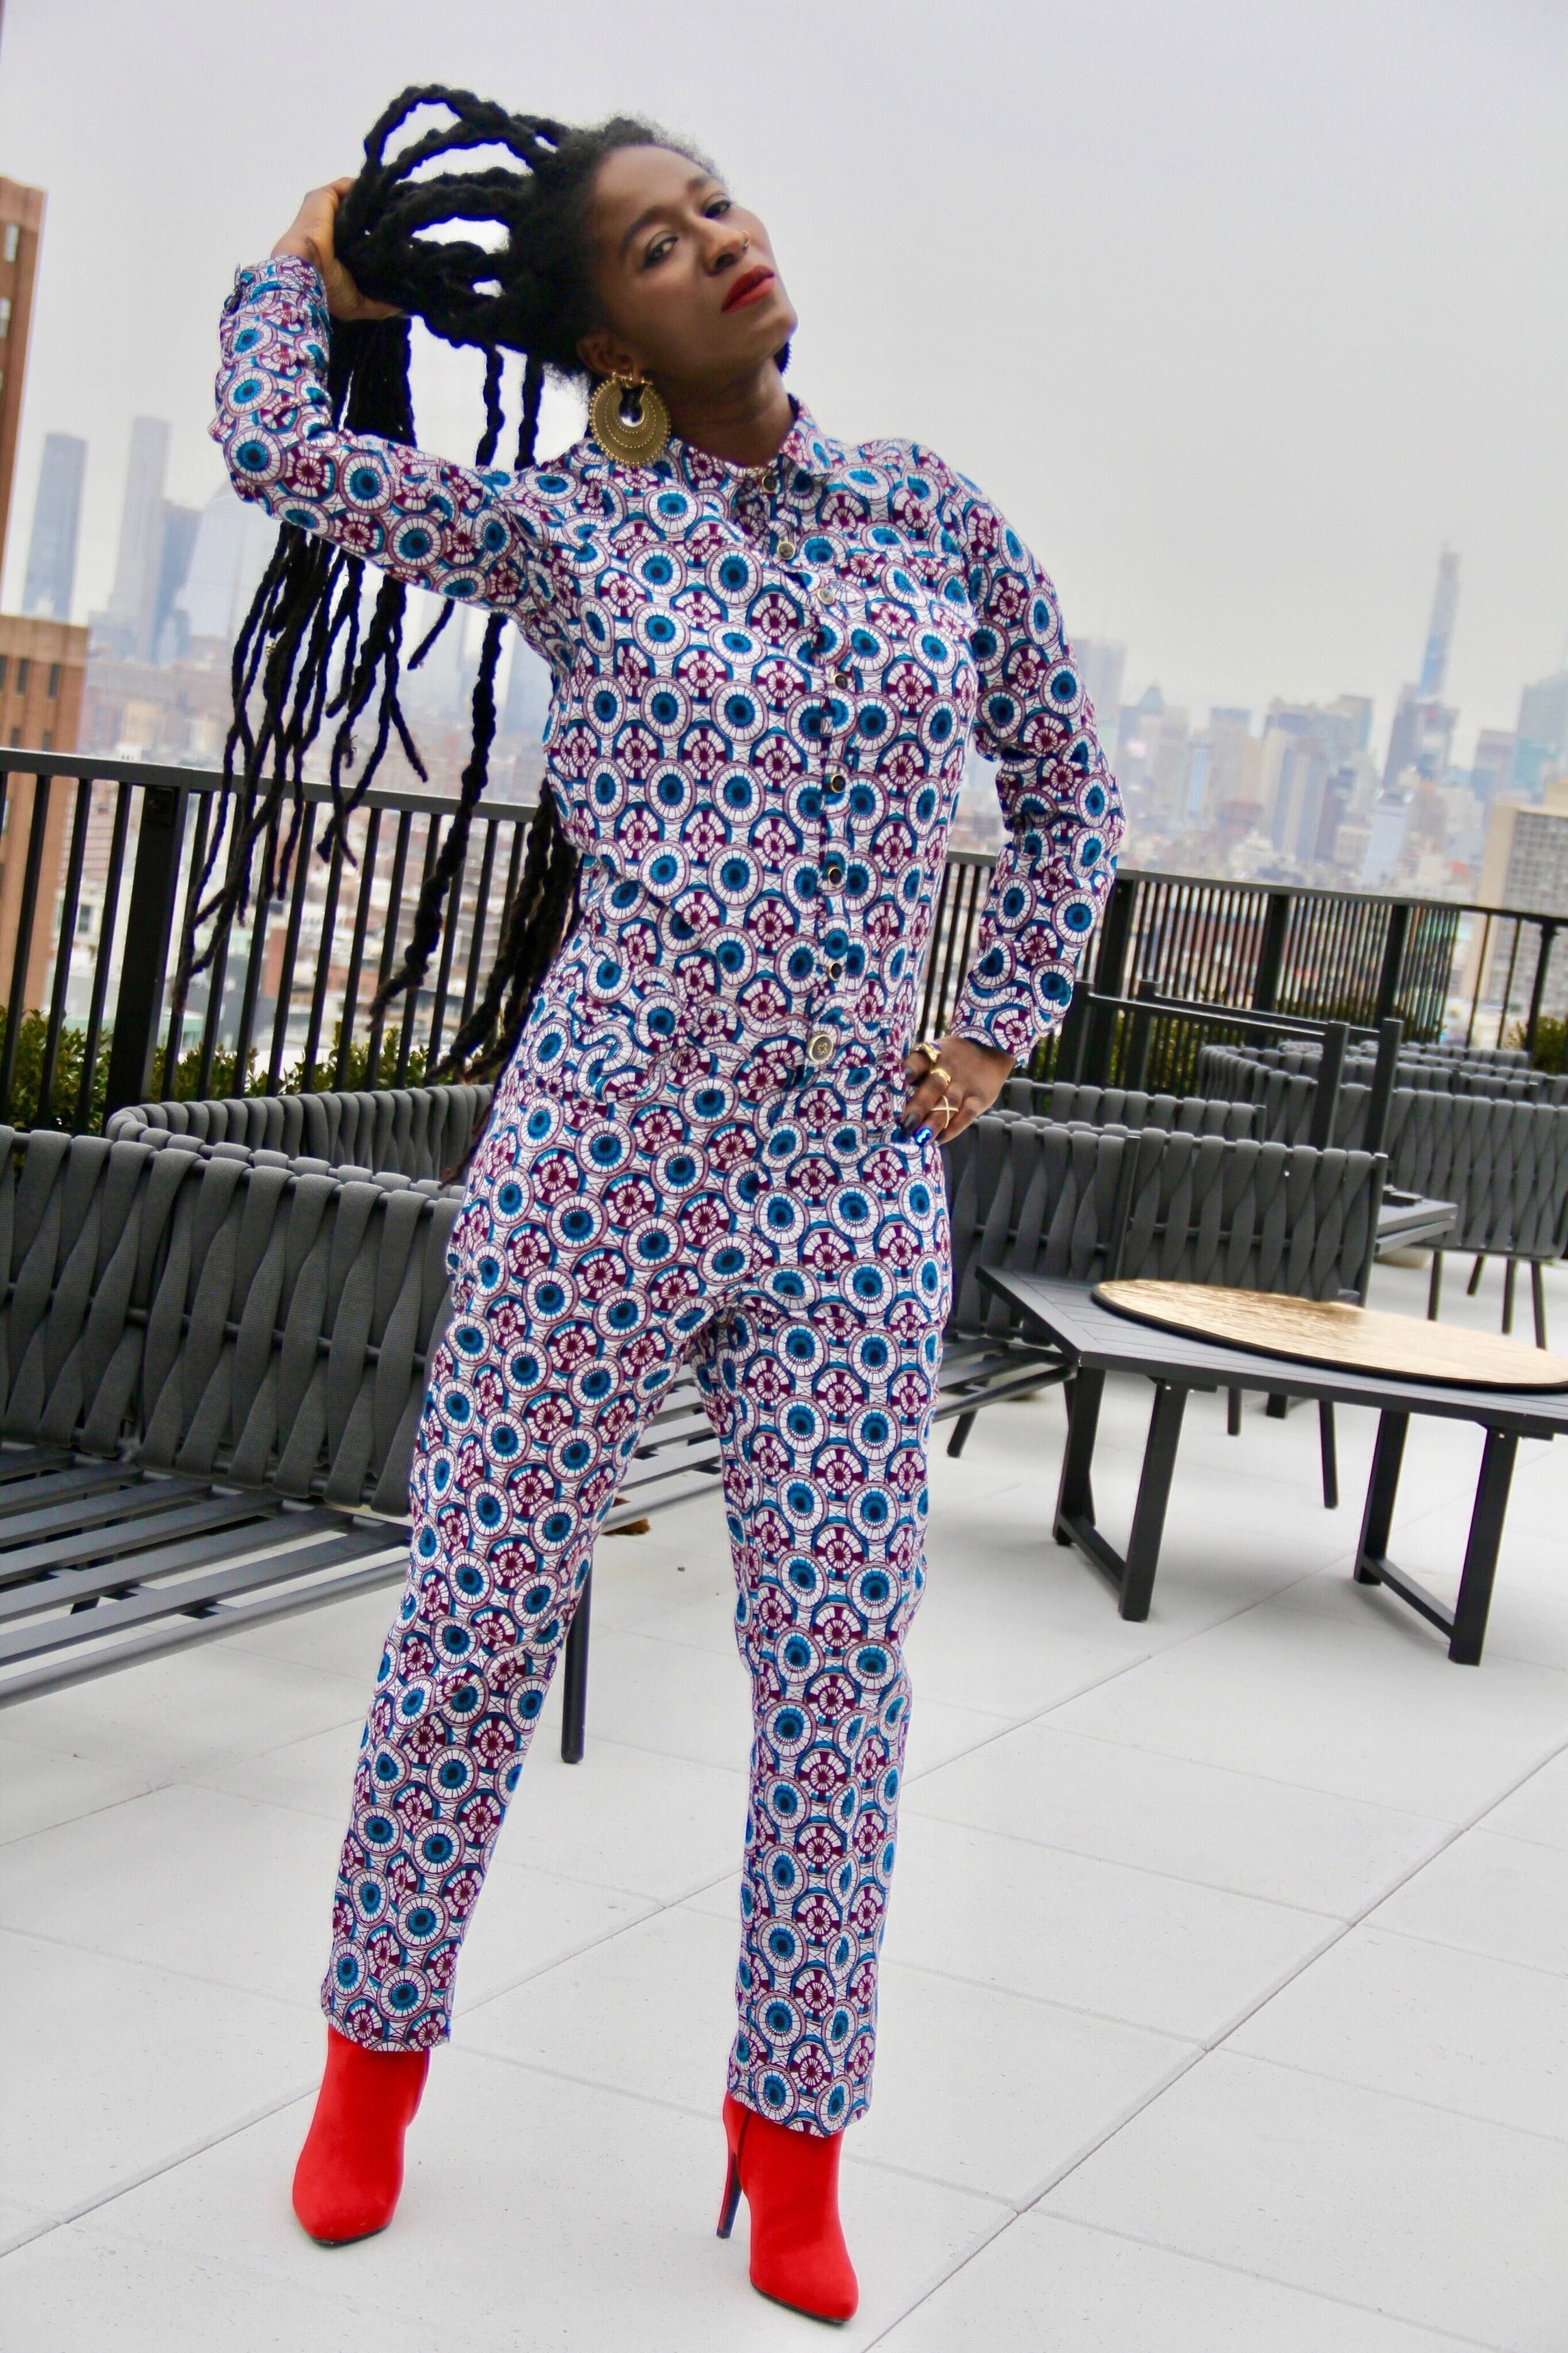 Model wearing the jumpsuit with blue, red, and white circle and square pattern that looks like a kaleidoscope